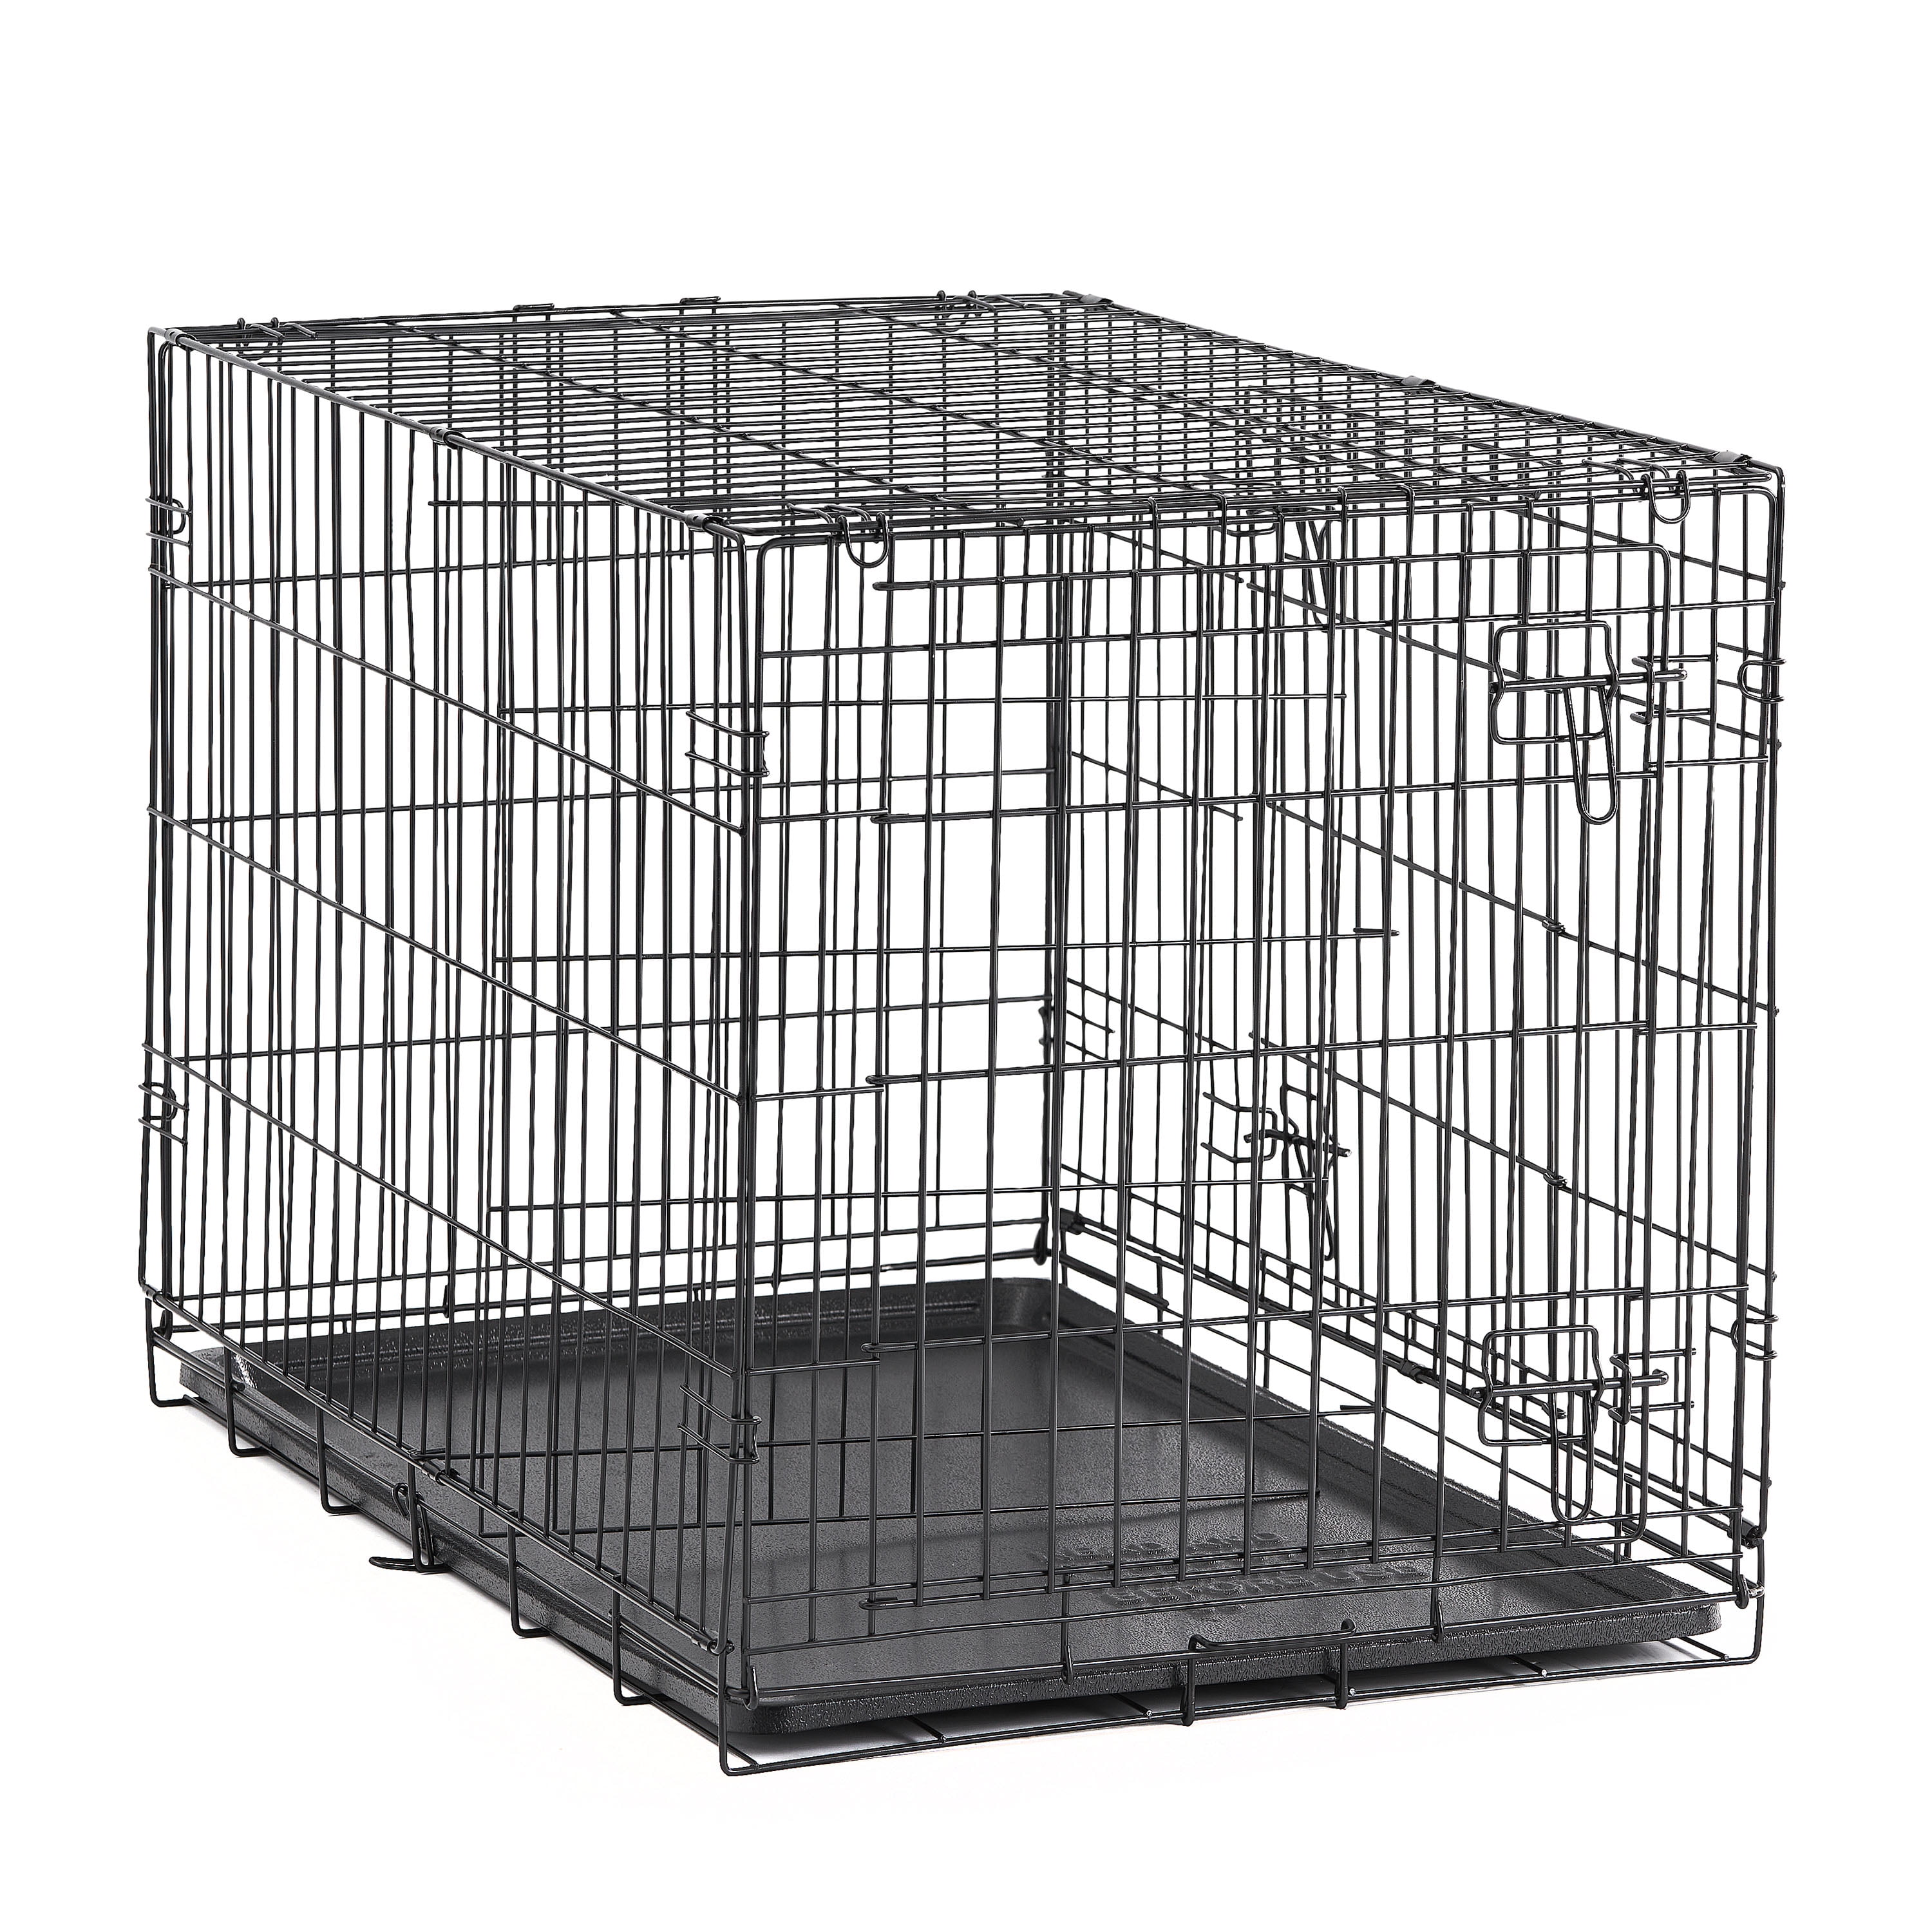 Pets at Home Double Door Dog Crate Grey X Small